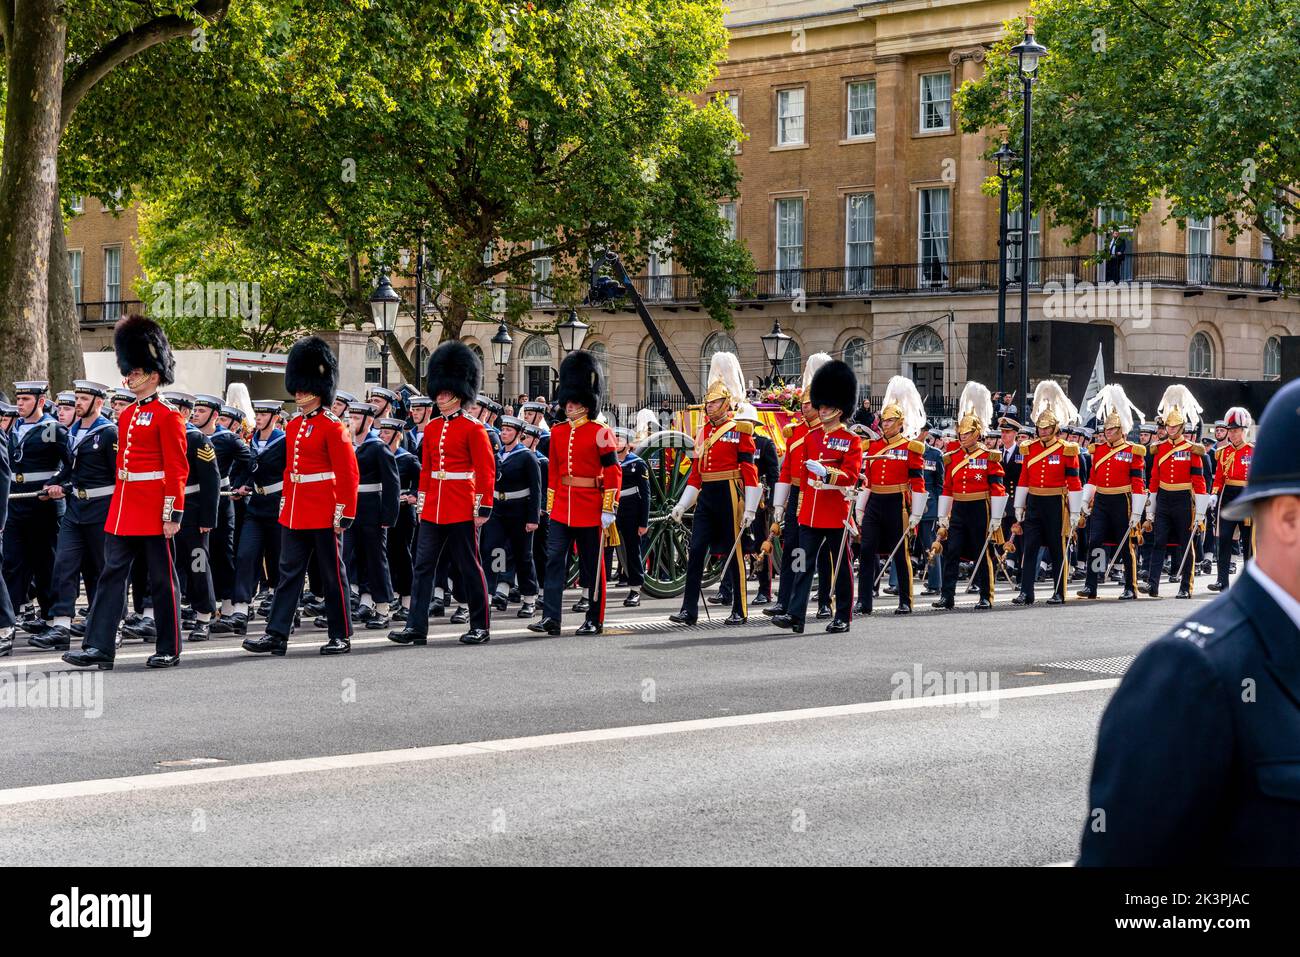 Naval Ratings Pull The State Gun Carriage and Coffin As Part Of The Funeral Procession Of Queen Elizabeth II, Whitehall, London, UK Stock Photo